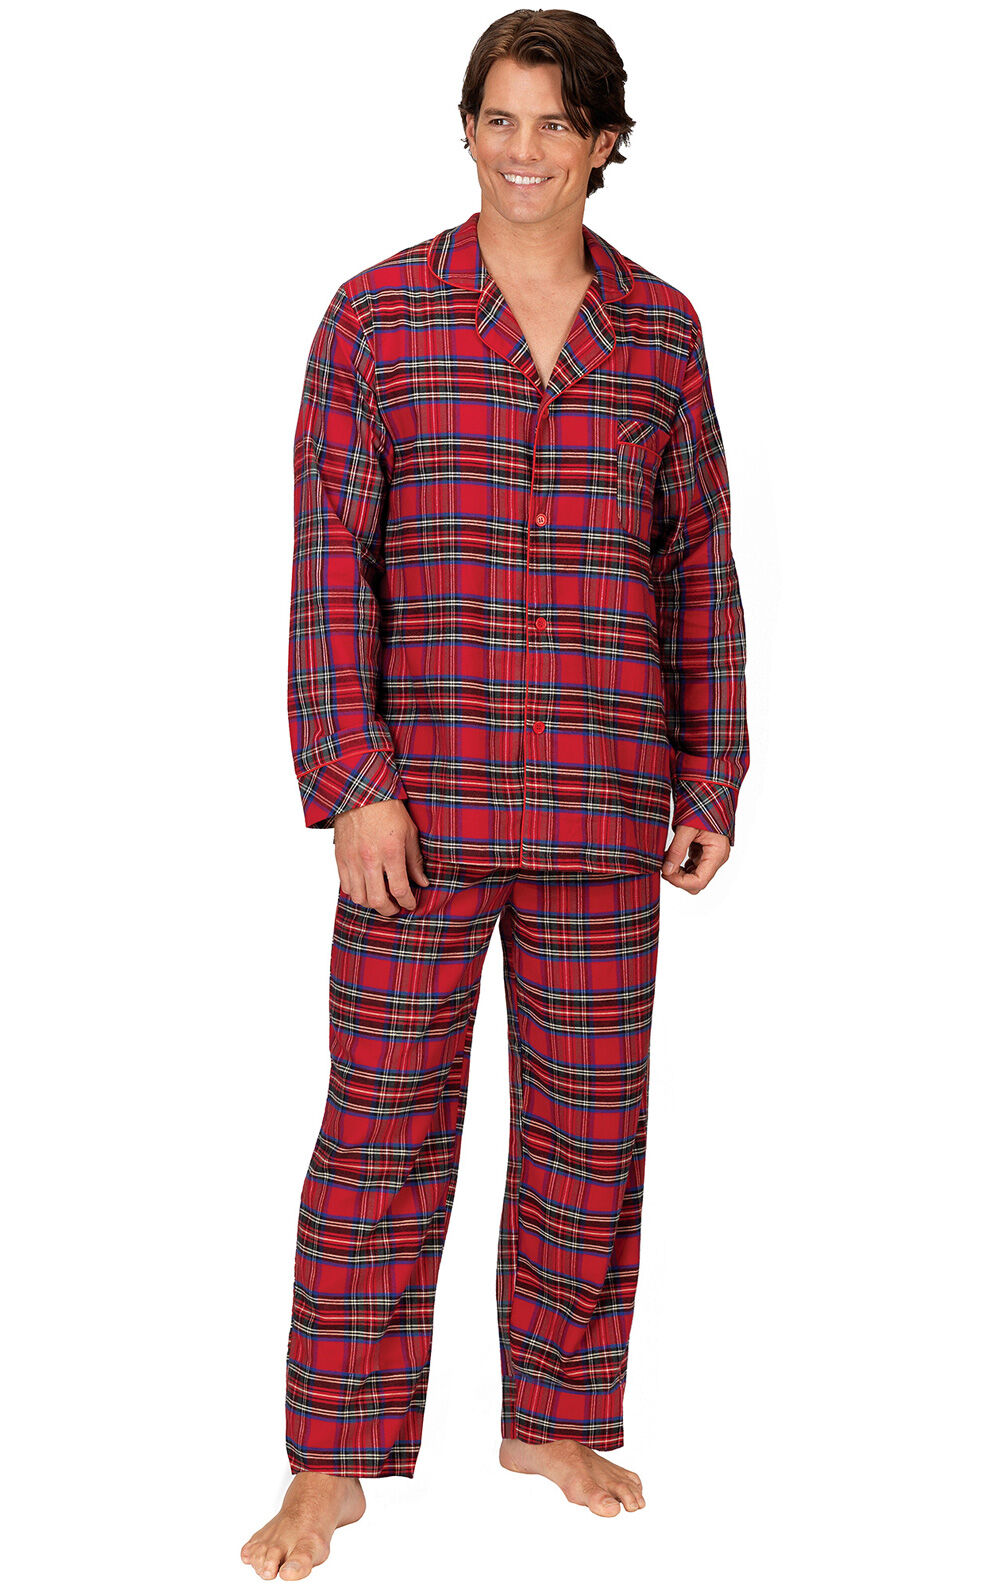 Mens Pajama Pants Mens Knit Cotton Flannel Plaid Lounge Bottoms with Button  Fly  China Men Sleepwear and Men Pajamas price  MadeinChinacom